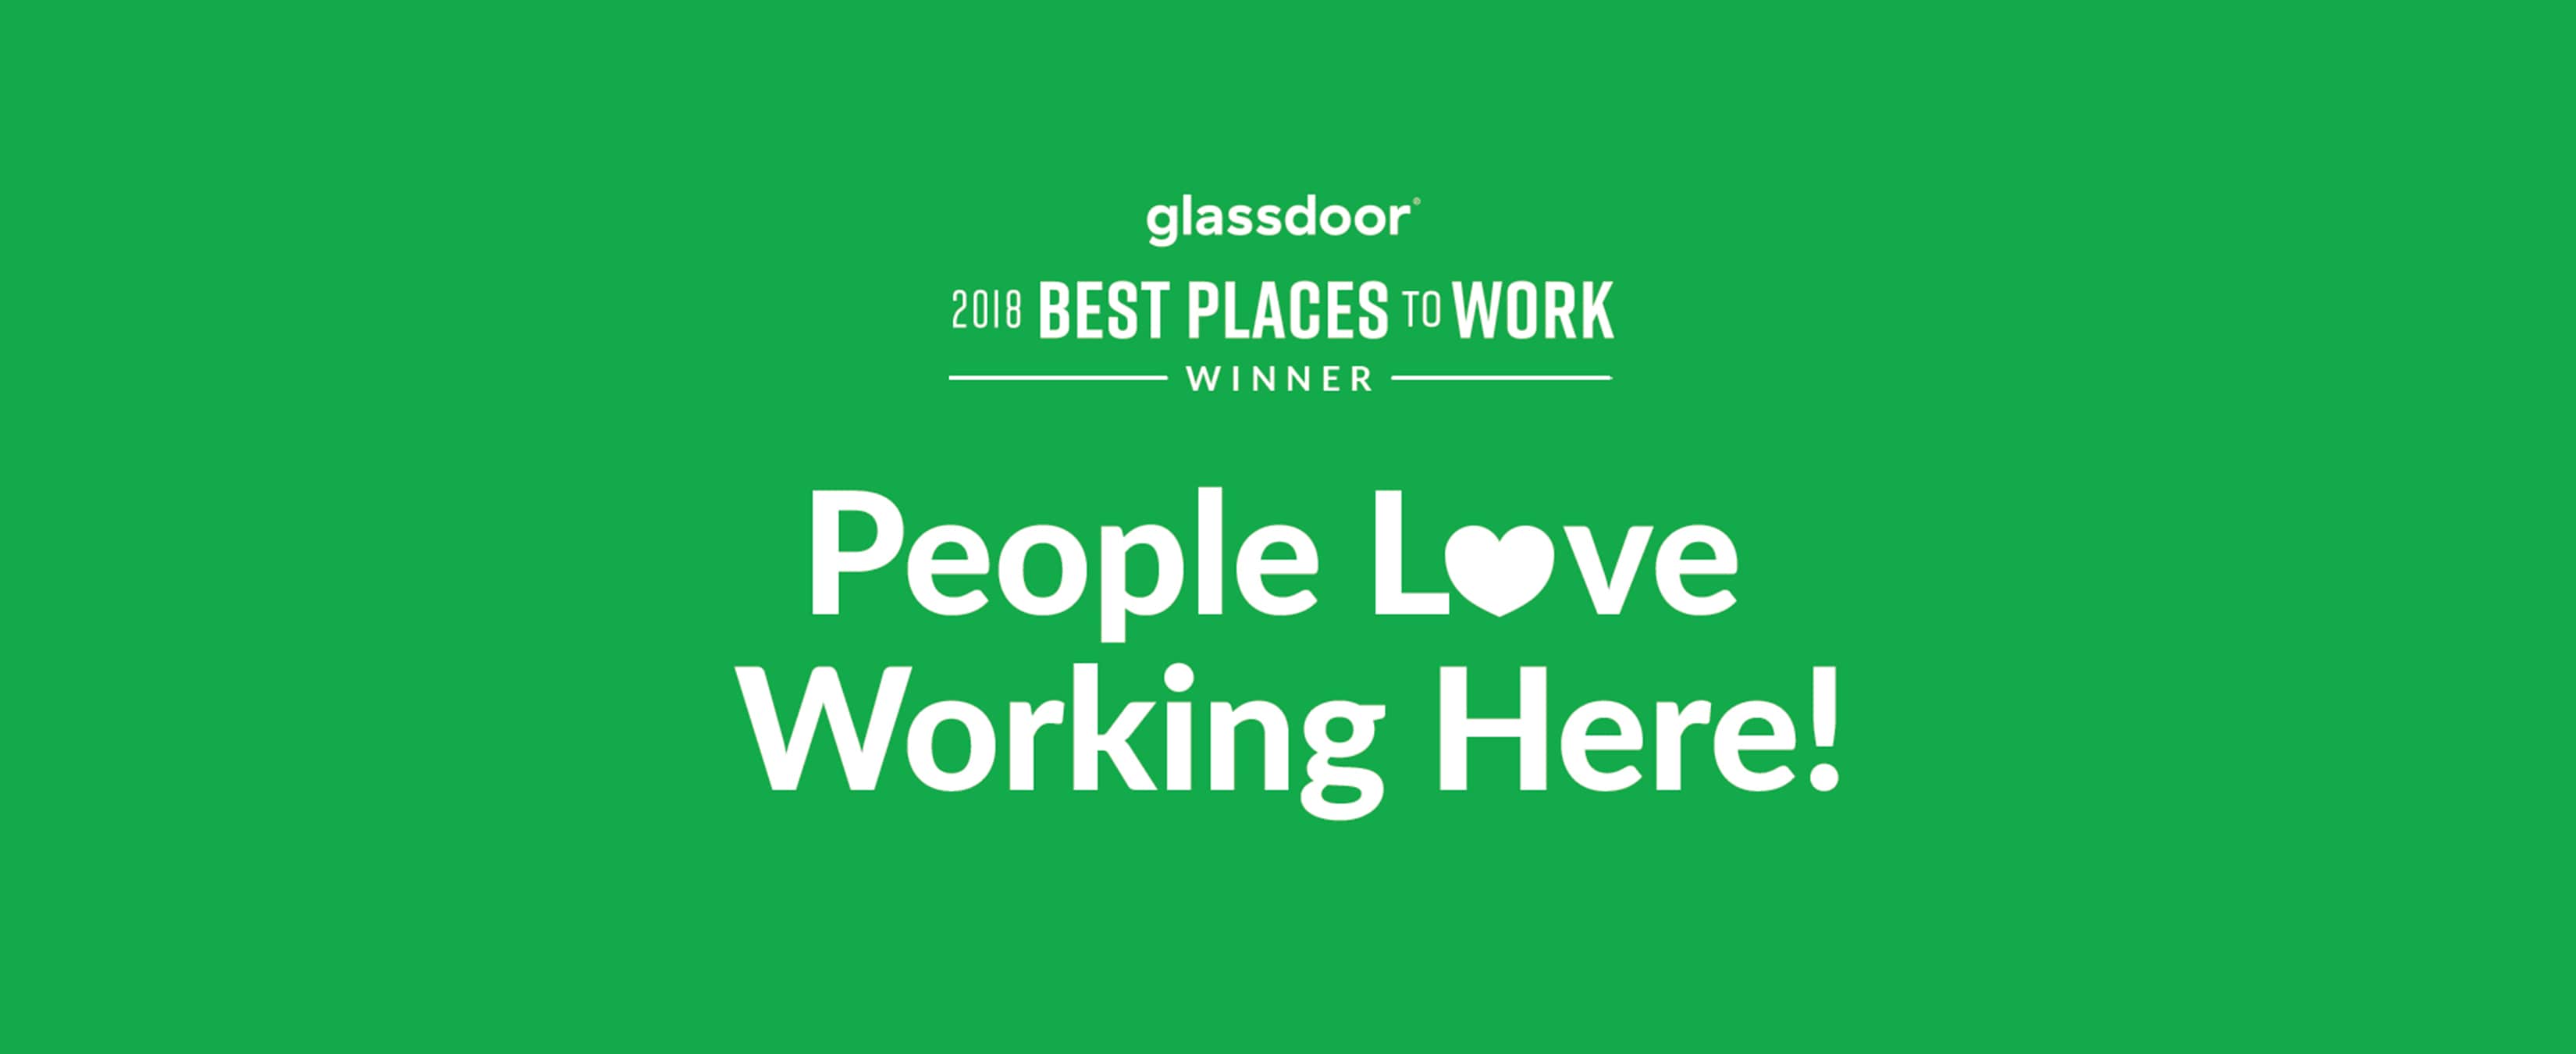 Concur honored as one of the best places to work by ...
